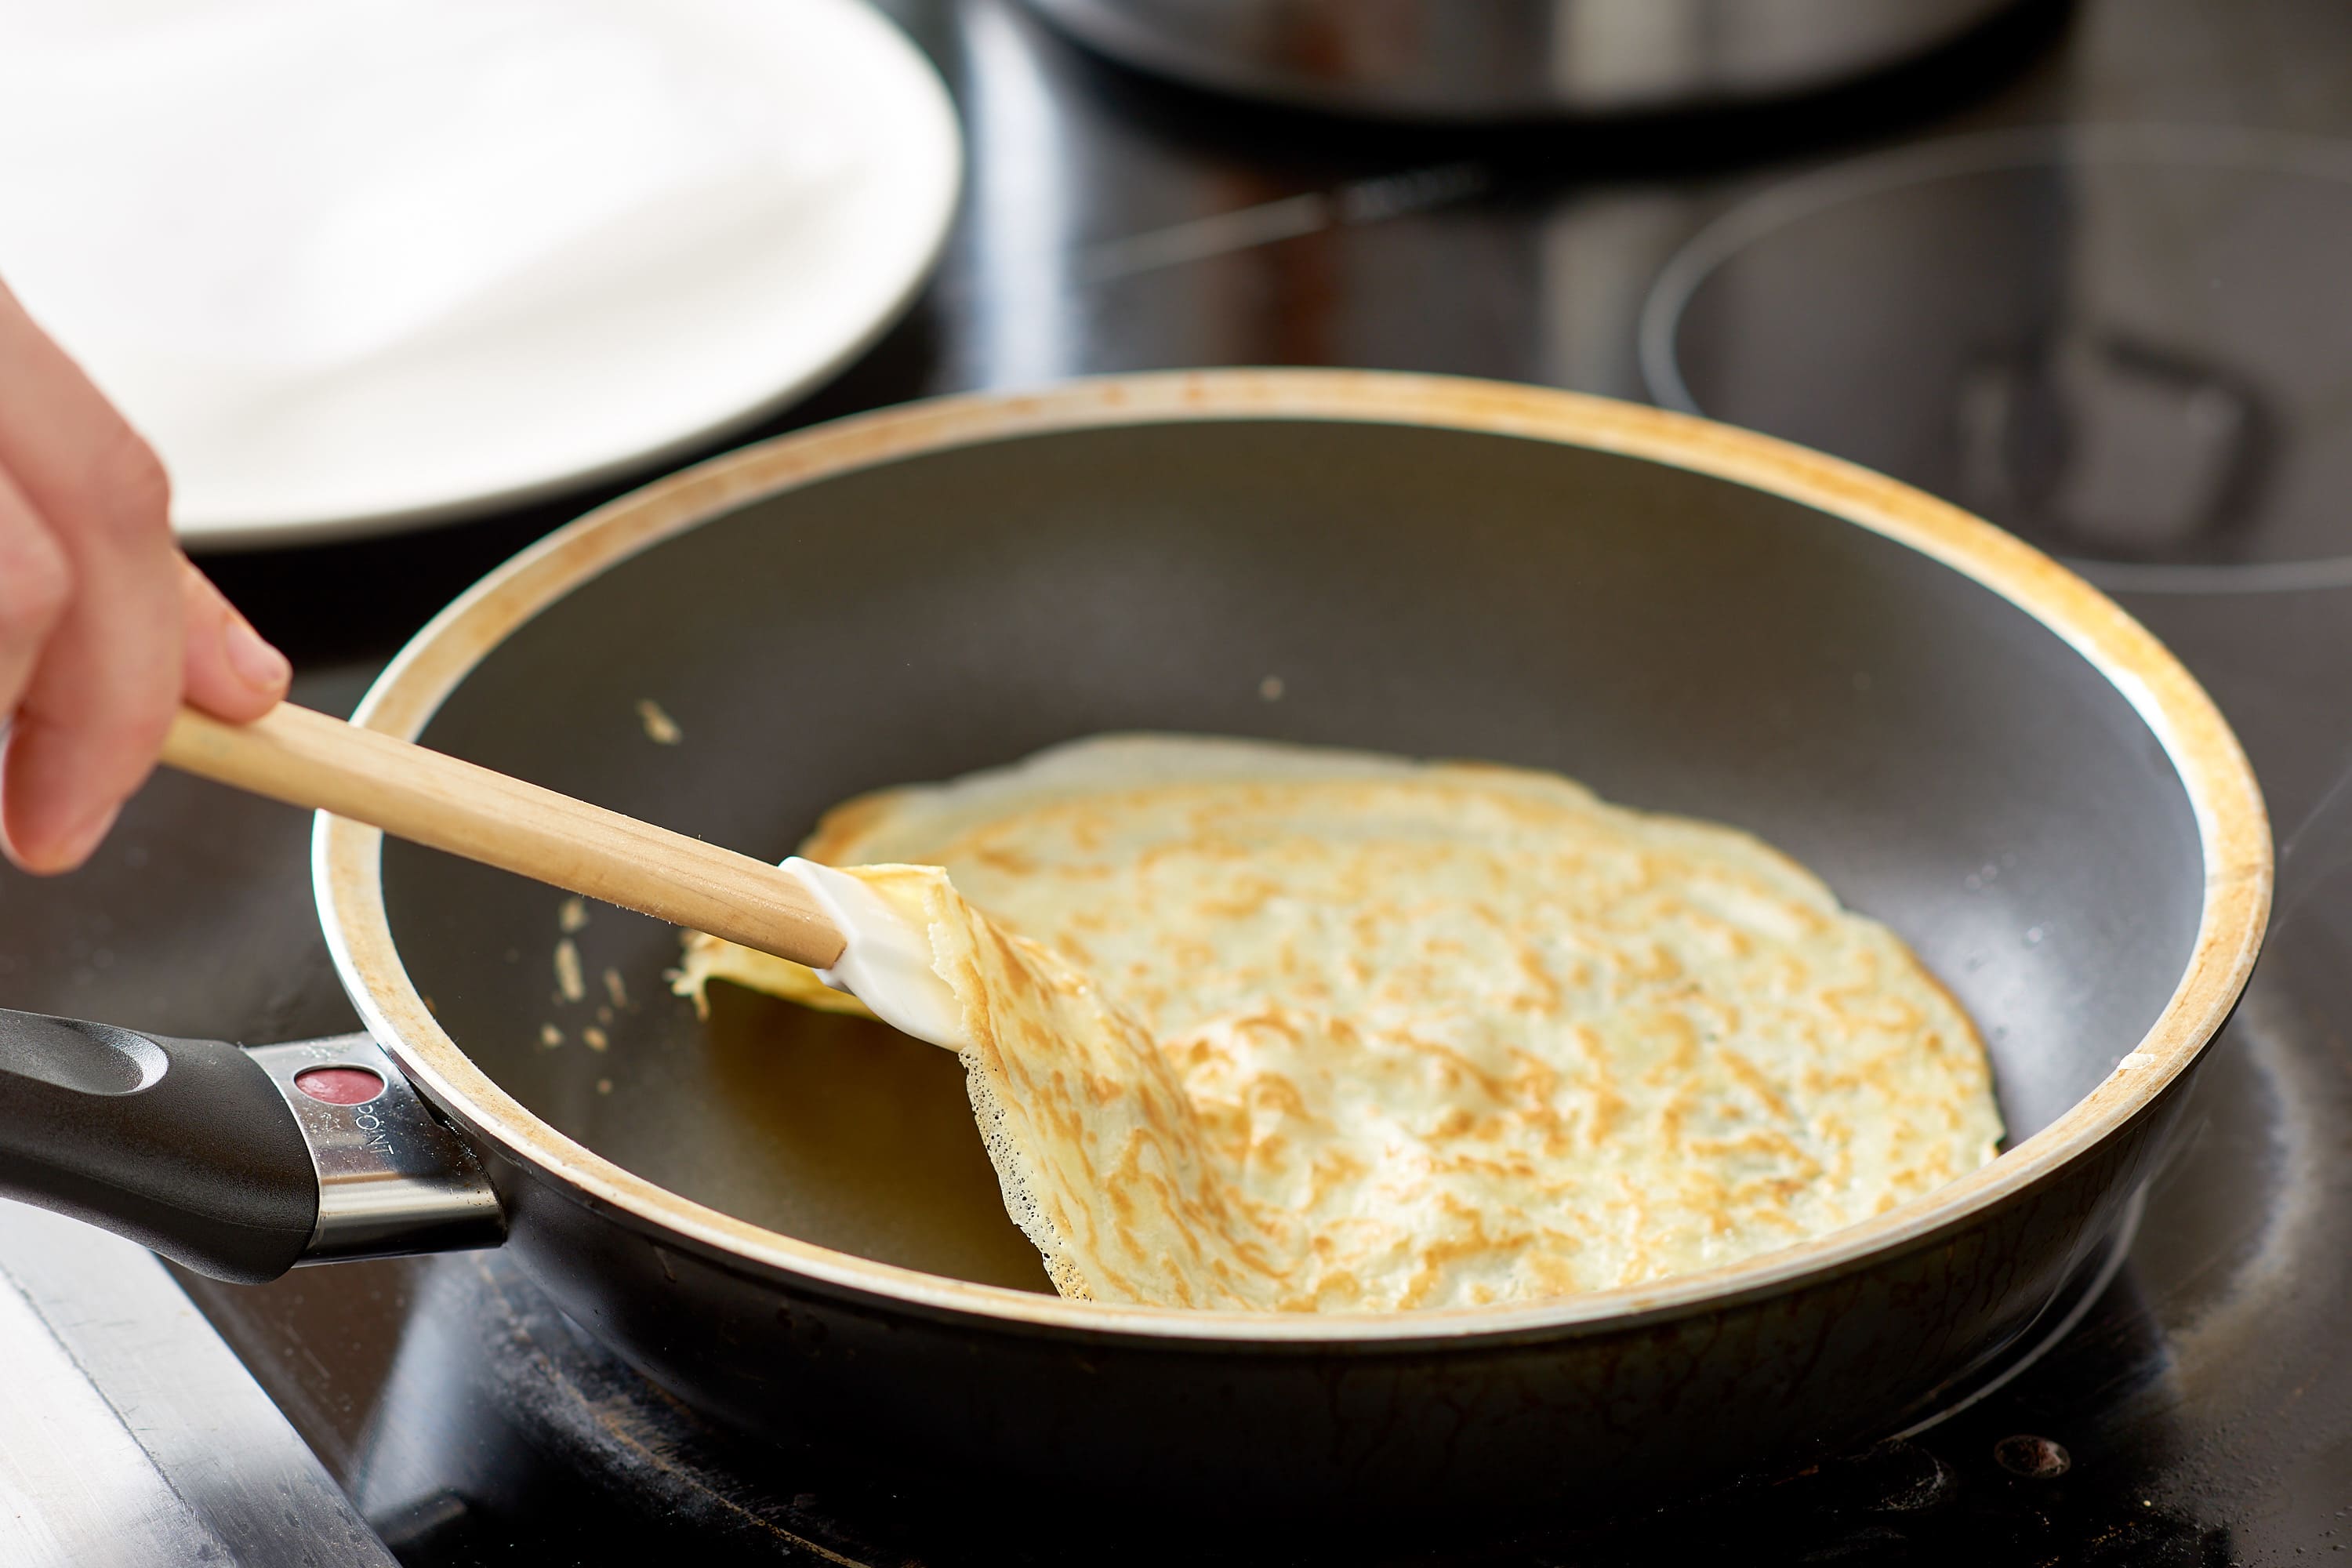 How To Make Crepes: The Simplest, Easiest Method